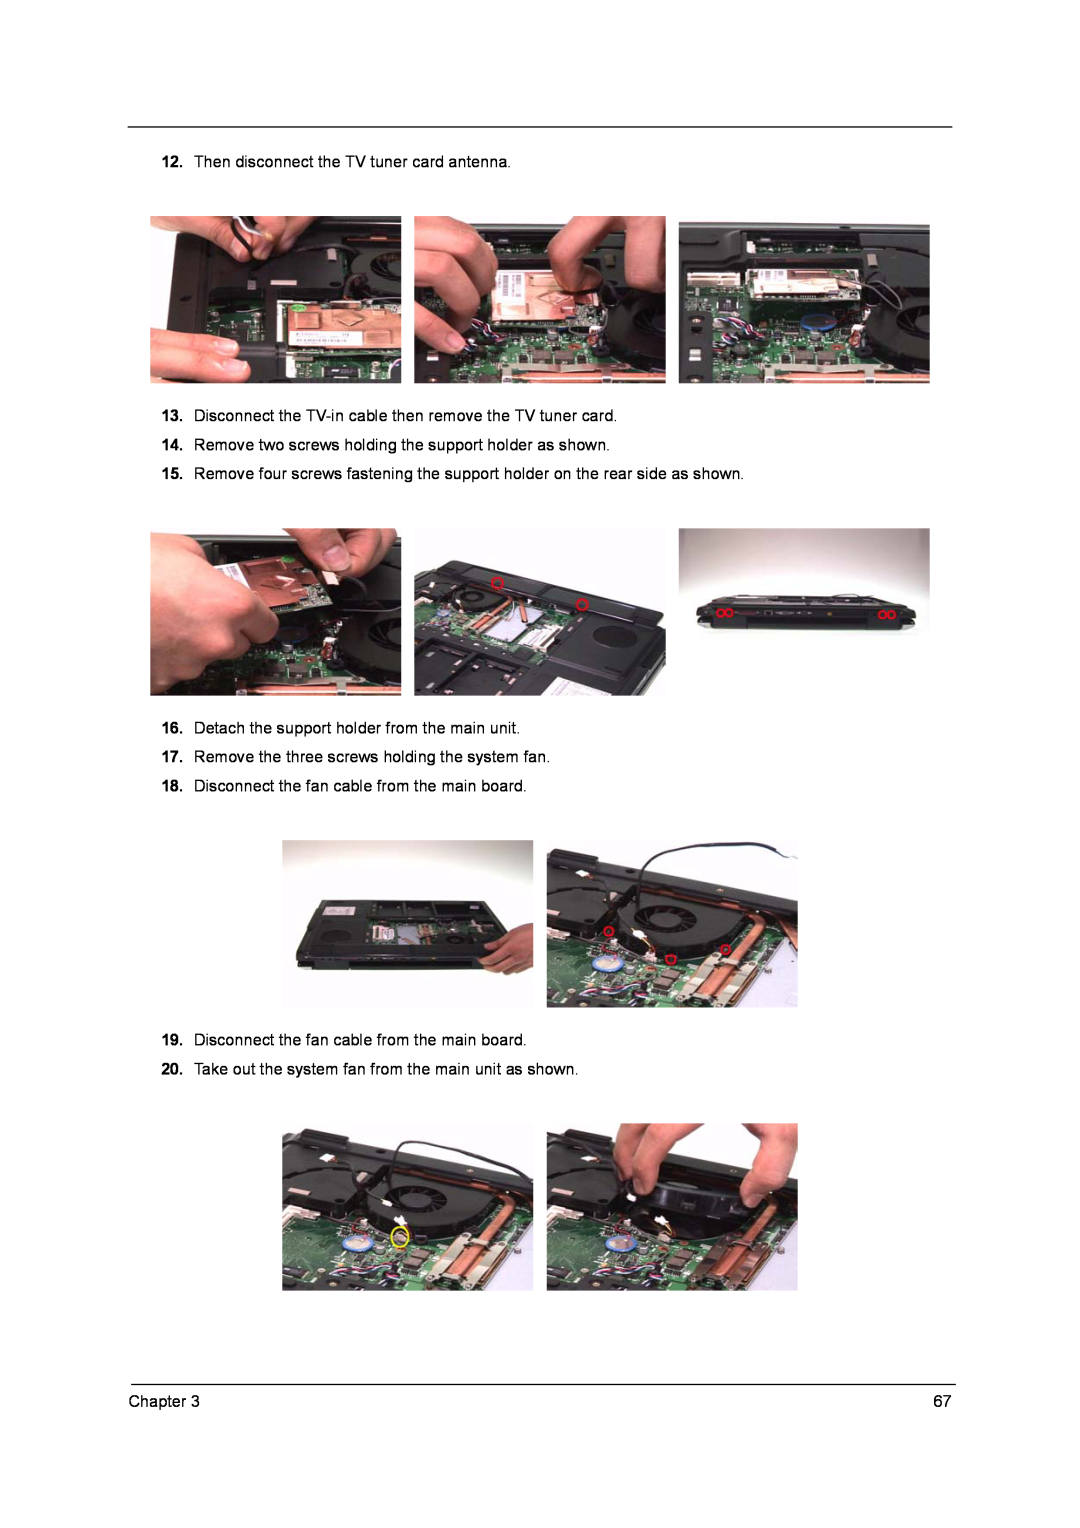 Acer 9800 Then disconnect the TV tuner card antenna, Disconnect the TV-in cable then remove the TV tuner card, Chapter 